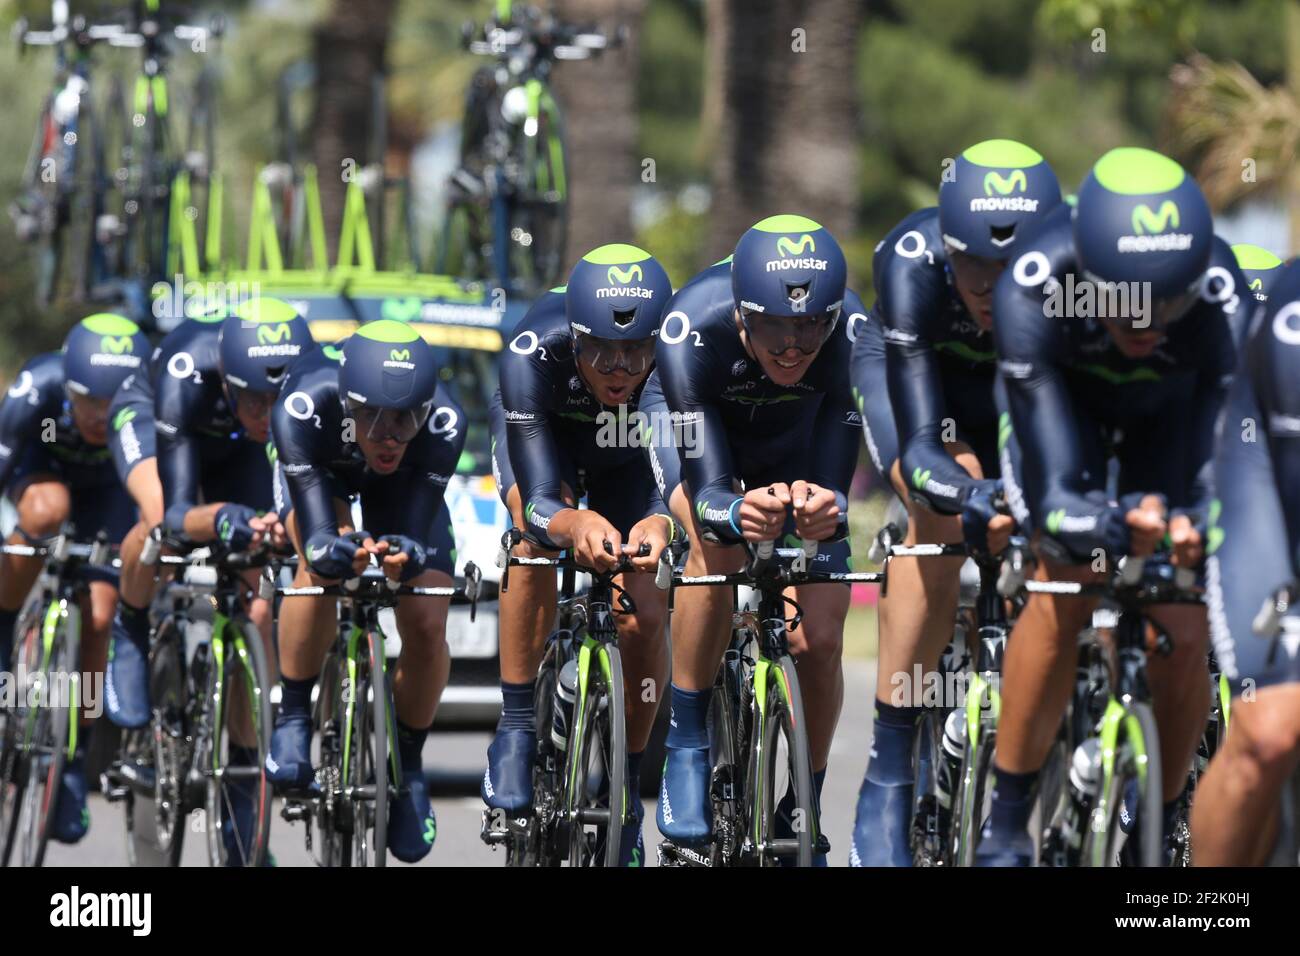 CYCLING - UCI WORLD TOUR - TOUR DE FRANCE 2013 - STAGE 4 - TEAM TIME TRIAL - Nice - Nice (25 km) - 02/07/2013 - PHOTO MANUEL BLONDEAU / DPPI - RIDERS OF MOVISTAR TEAM COMPETE DURING THE 25KM TEAM TIME-TRIAL Stock Photo